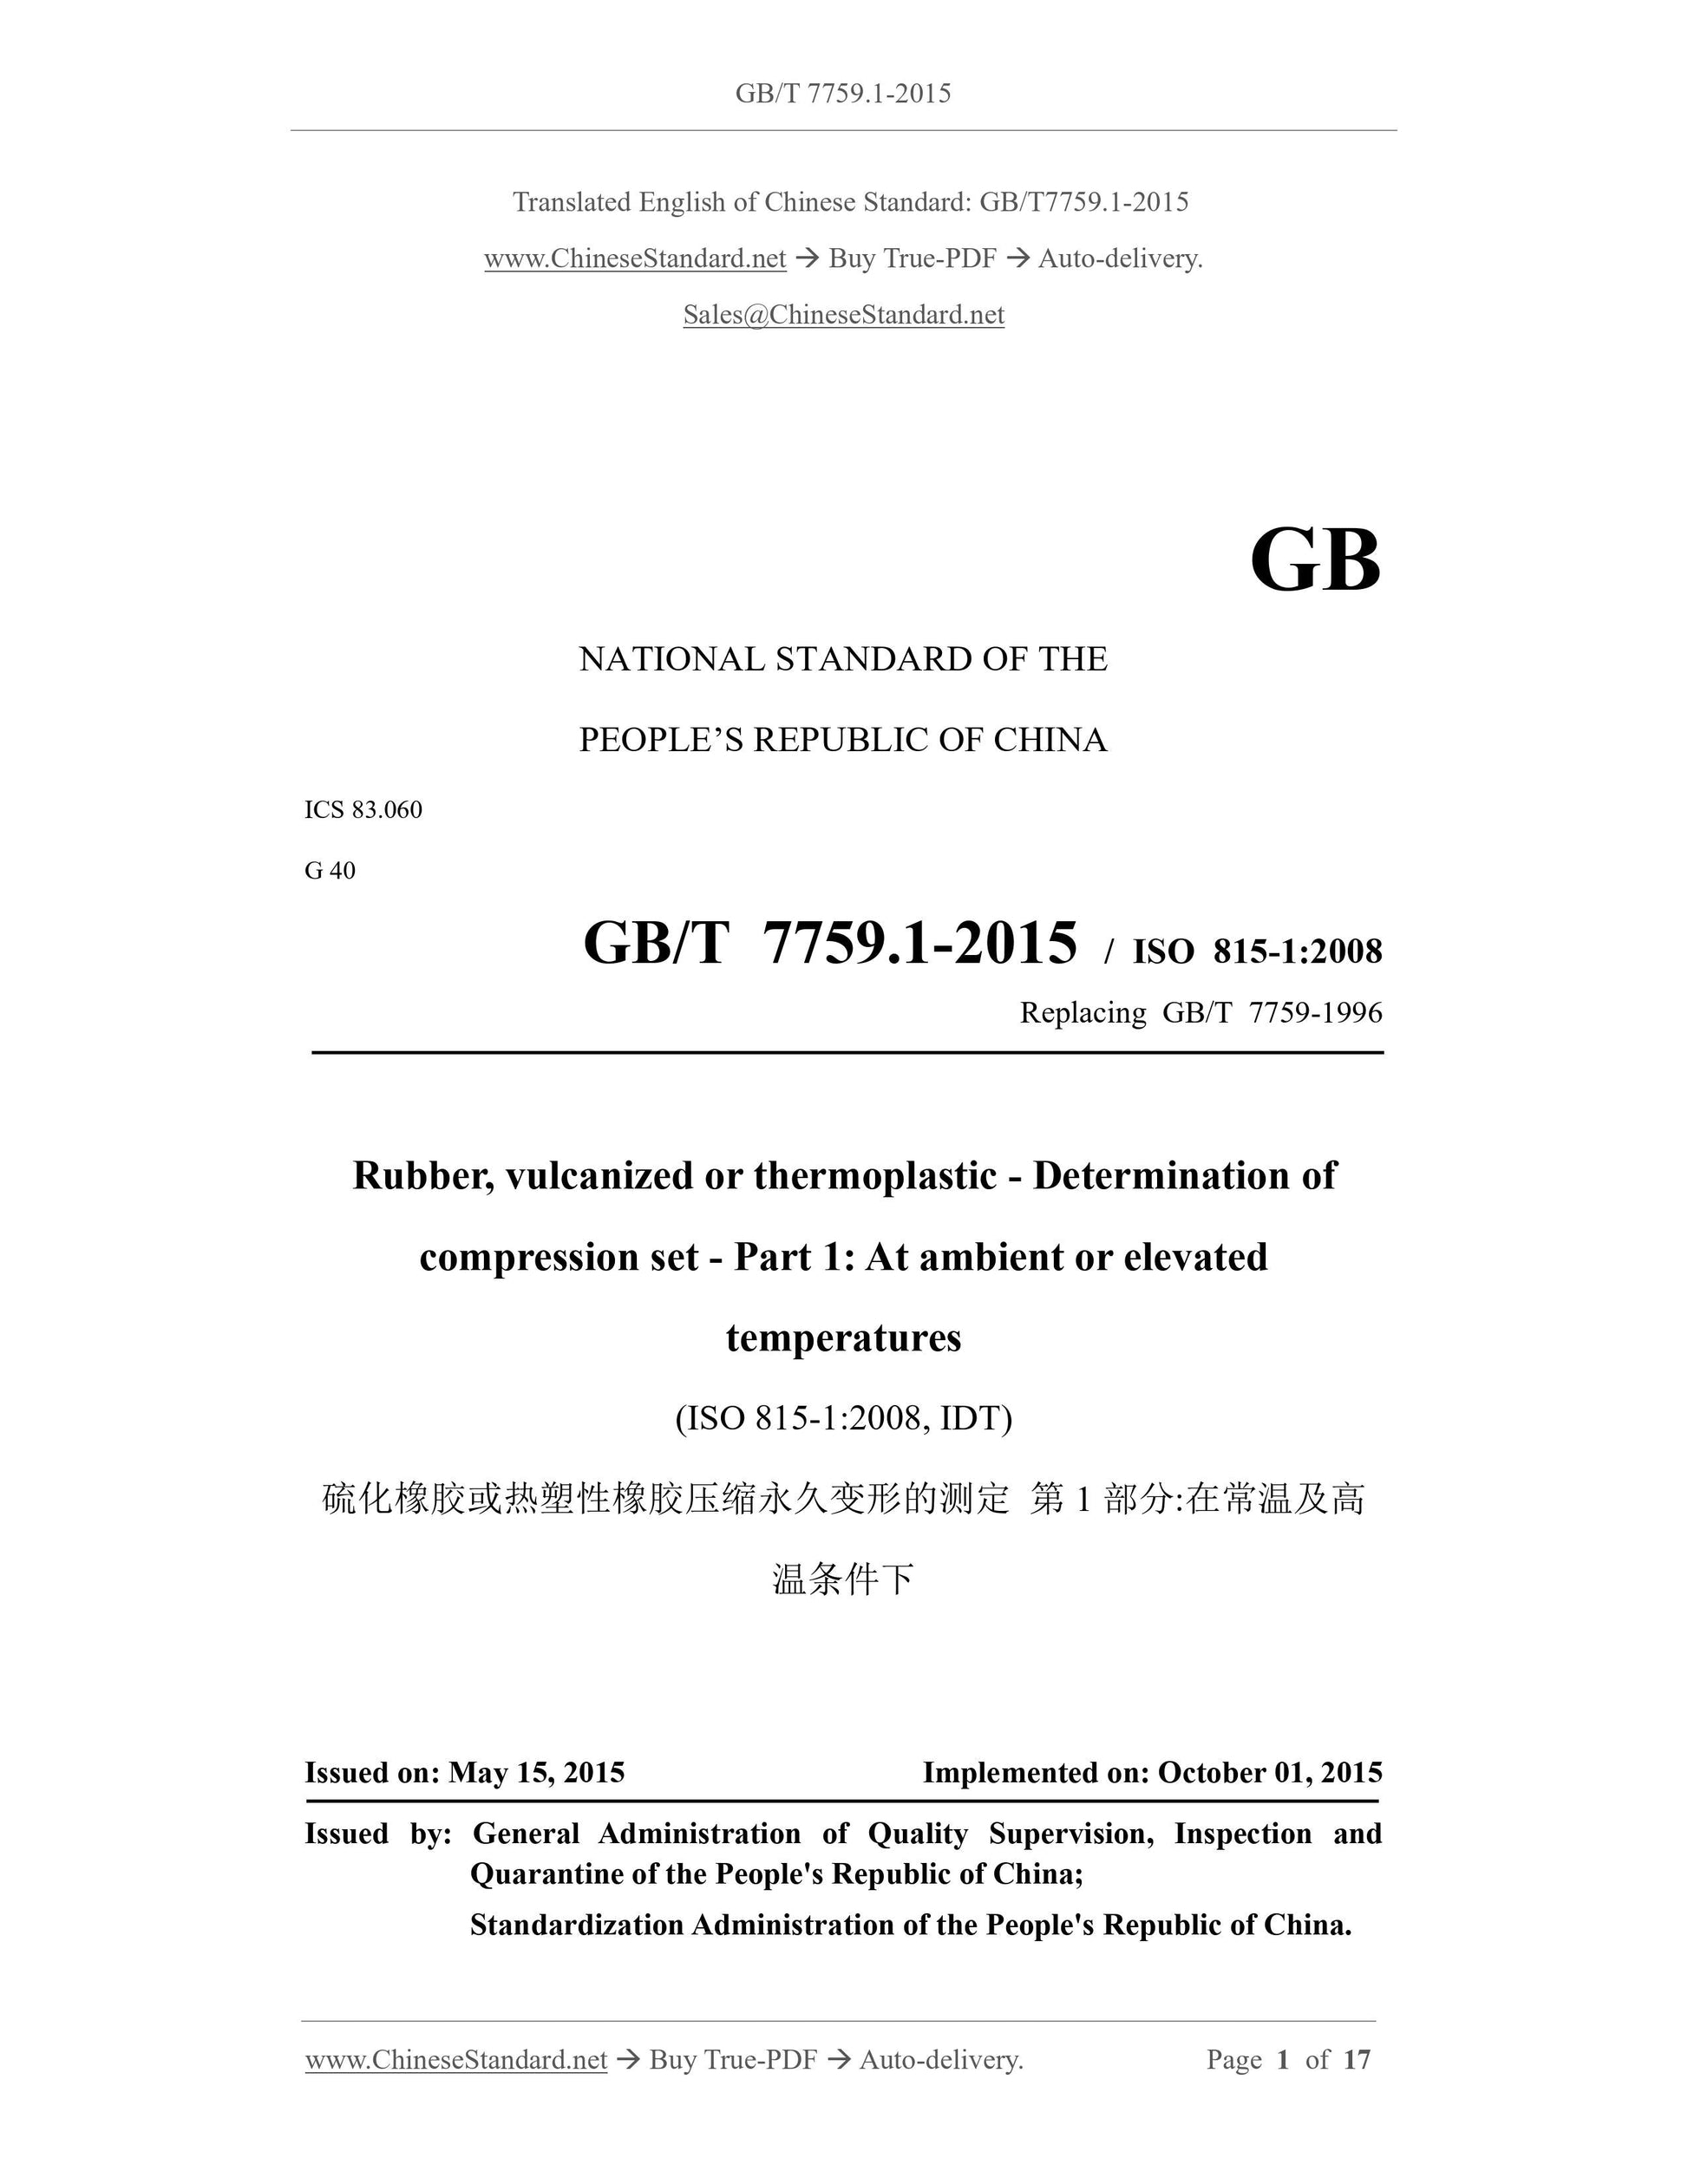 GB/T 7759.1-2015 Page 1